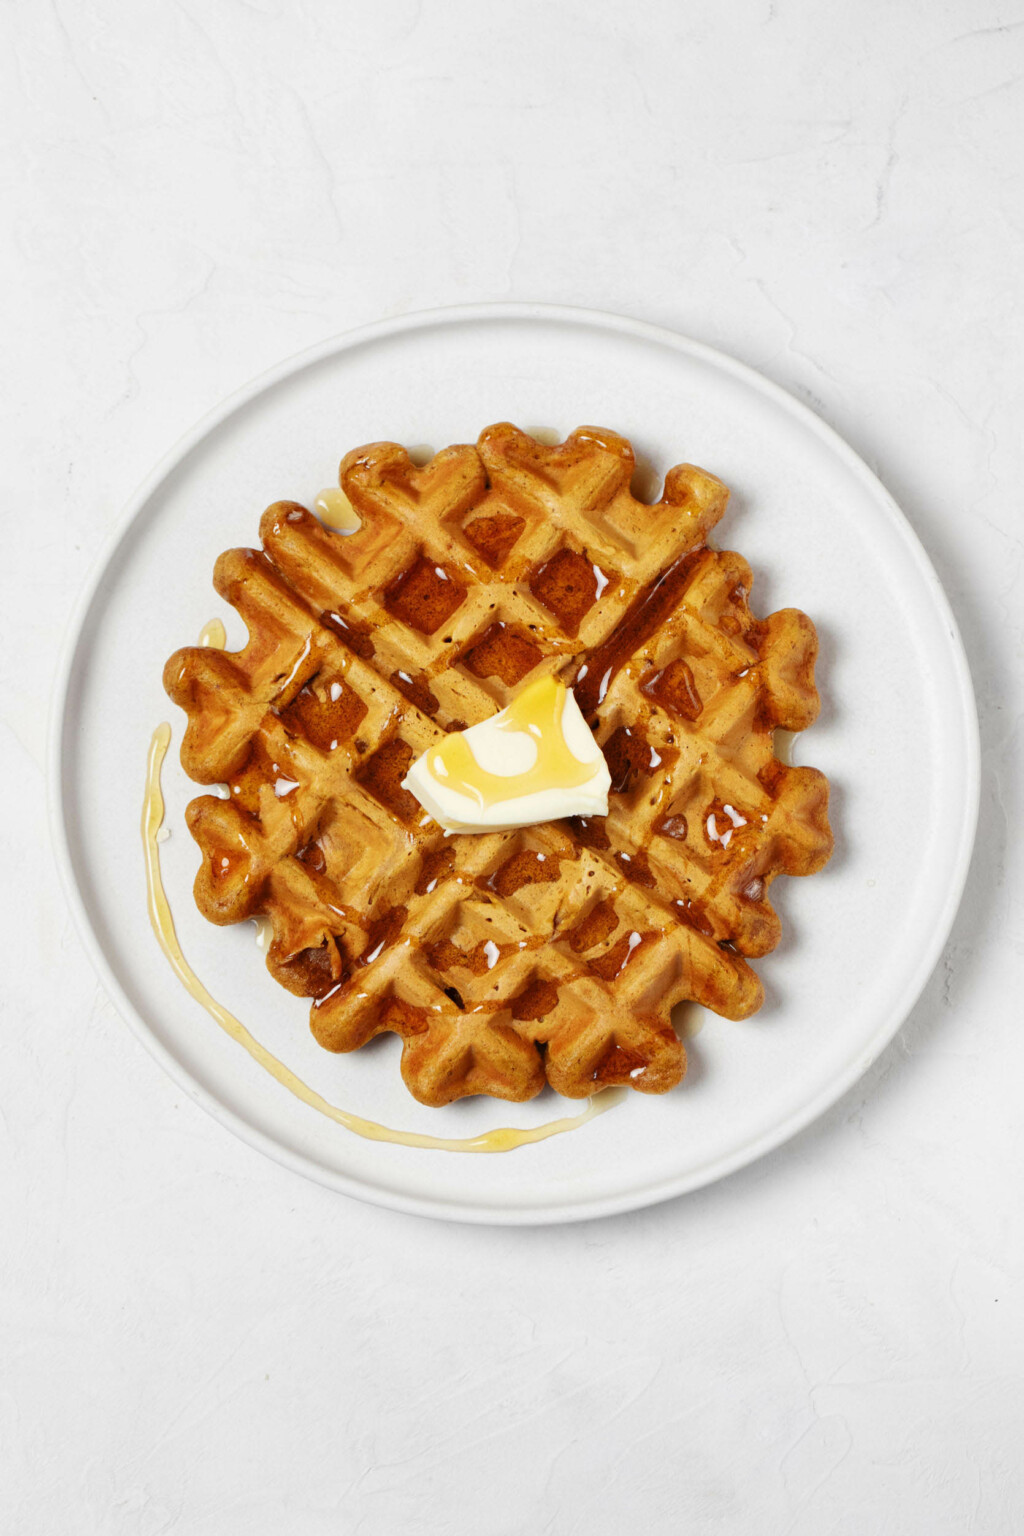 A round, white plate rests on a white surface. The plate is being used to serve a vegan pumpkin waffle, which is topped with plant-based butter and maple syrup.